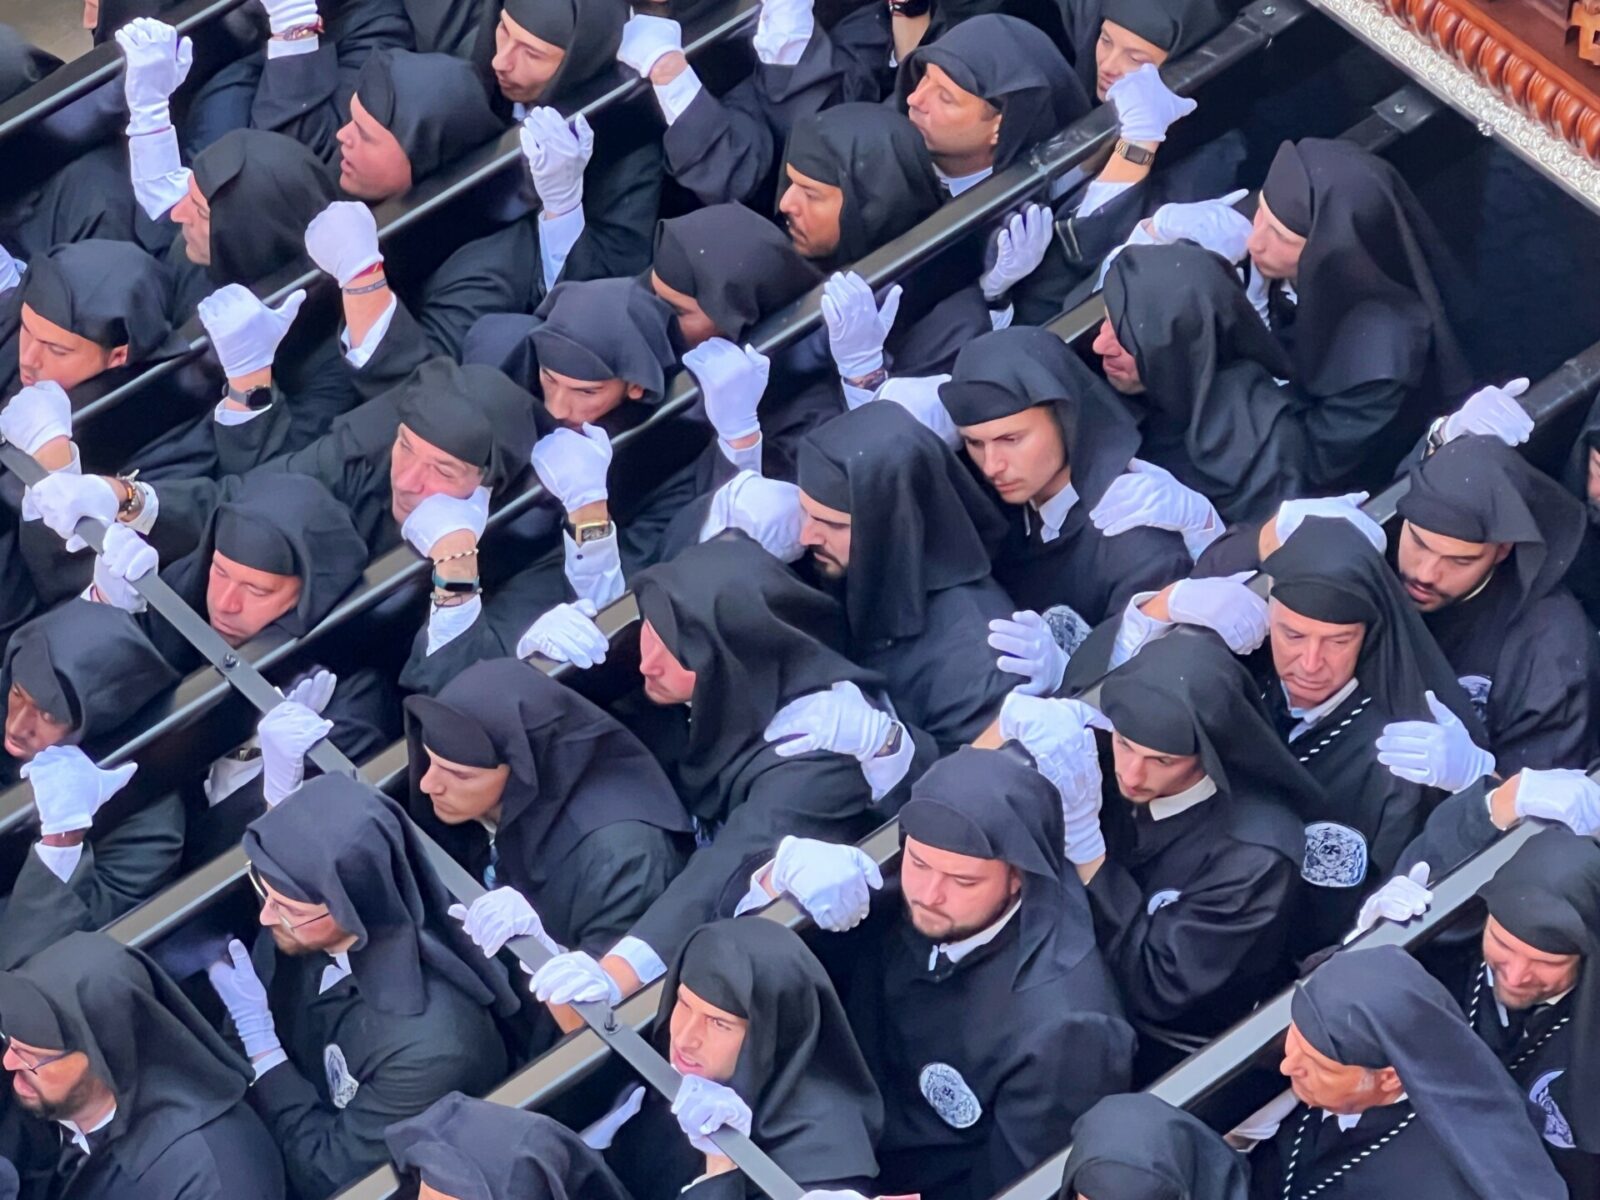 This image is a close up of the bearers resting, their faces clearly showing the exertion required to carry the tronos through the streets of Malaga during Semana Santa